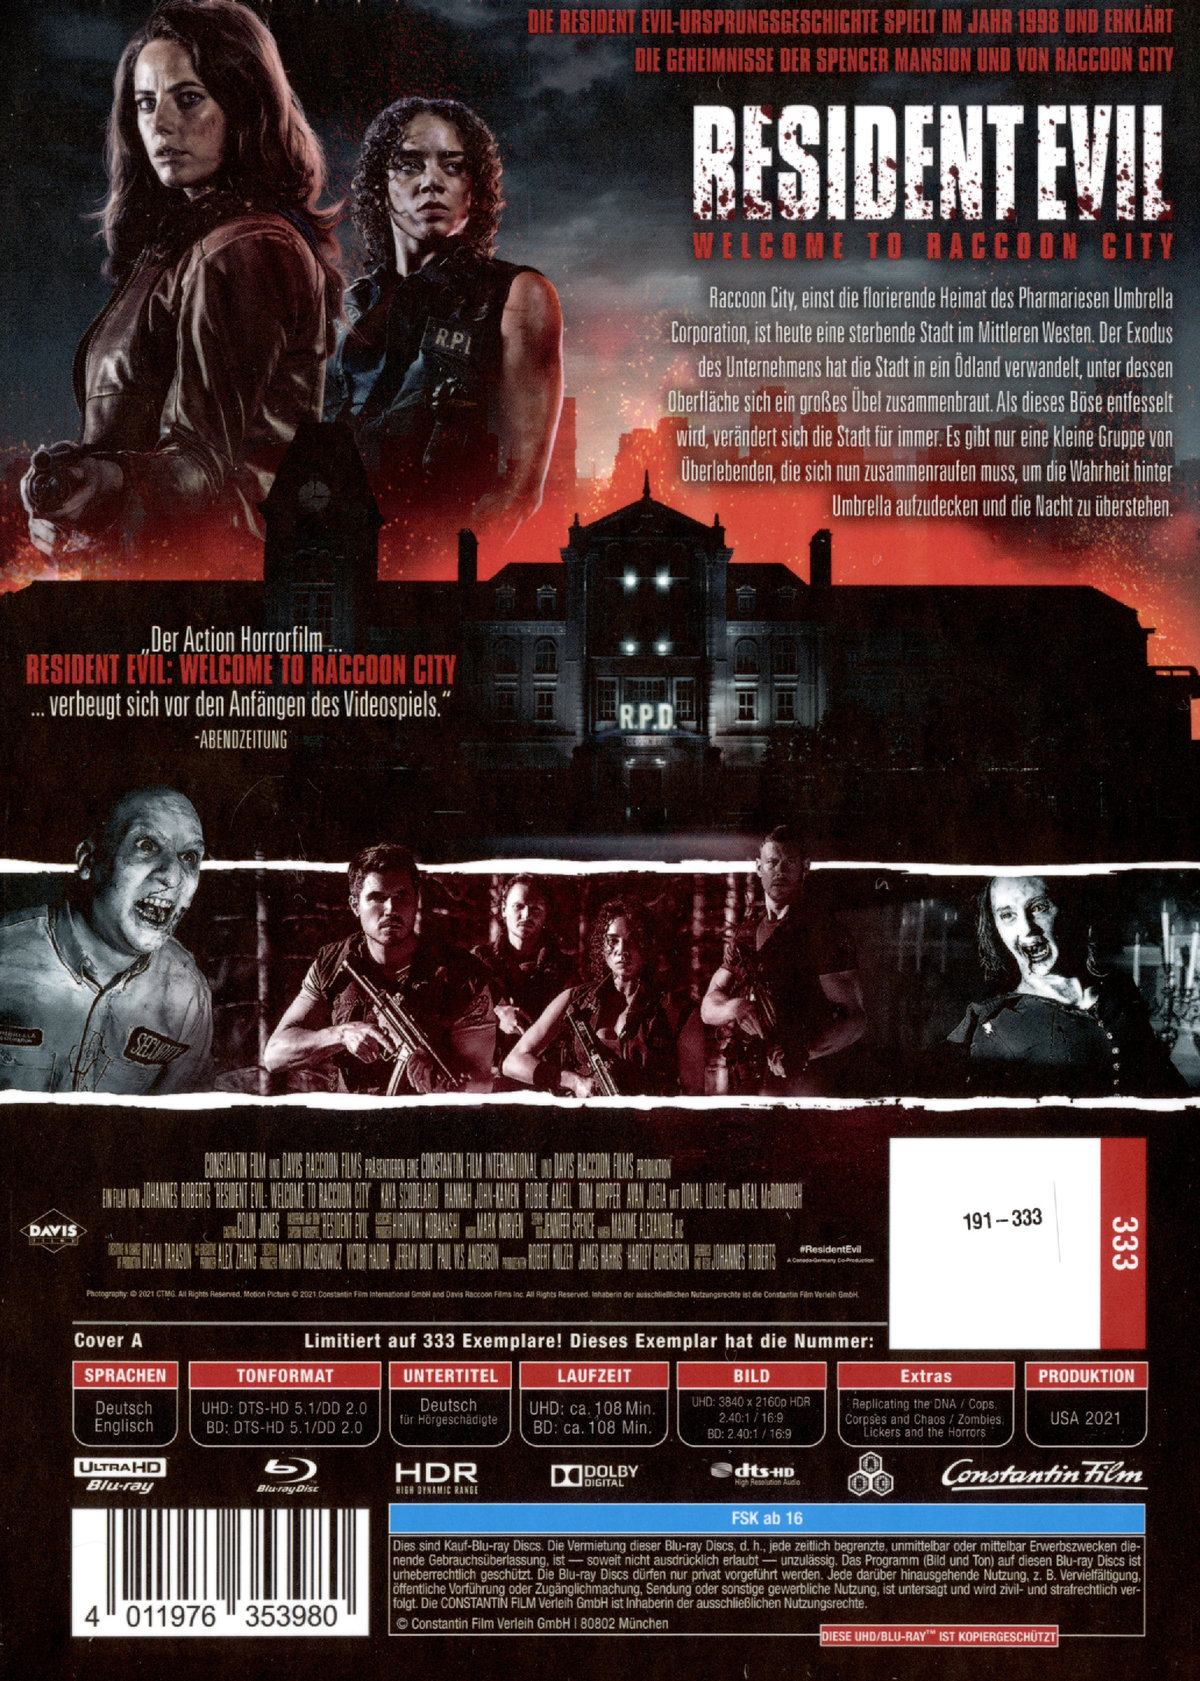 Resident Evil: Welcome to Raccoon City - Uncut Mediabook Edition (4K Ultra HD+blu-ray) (A)